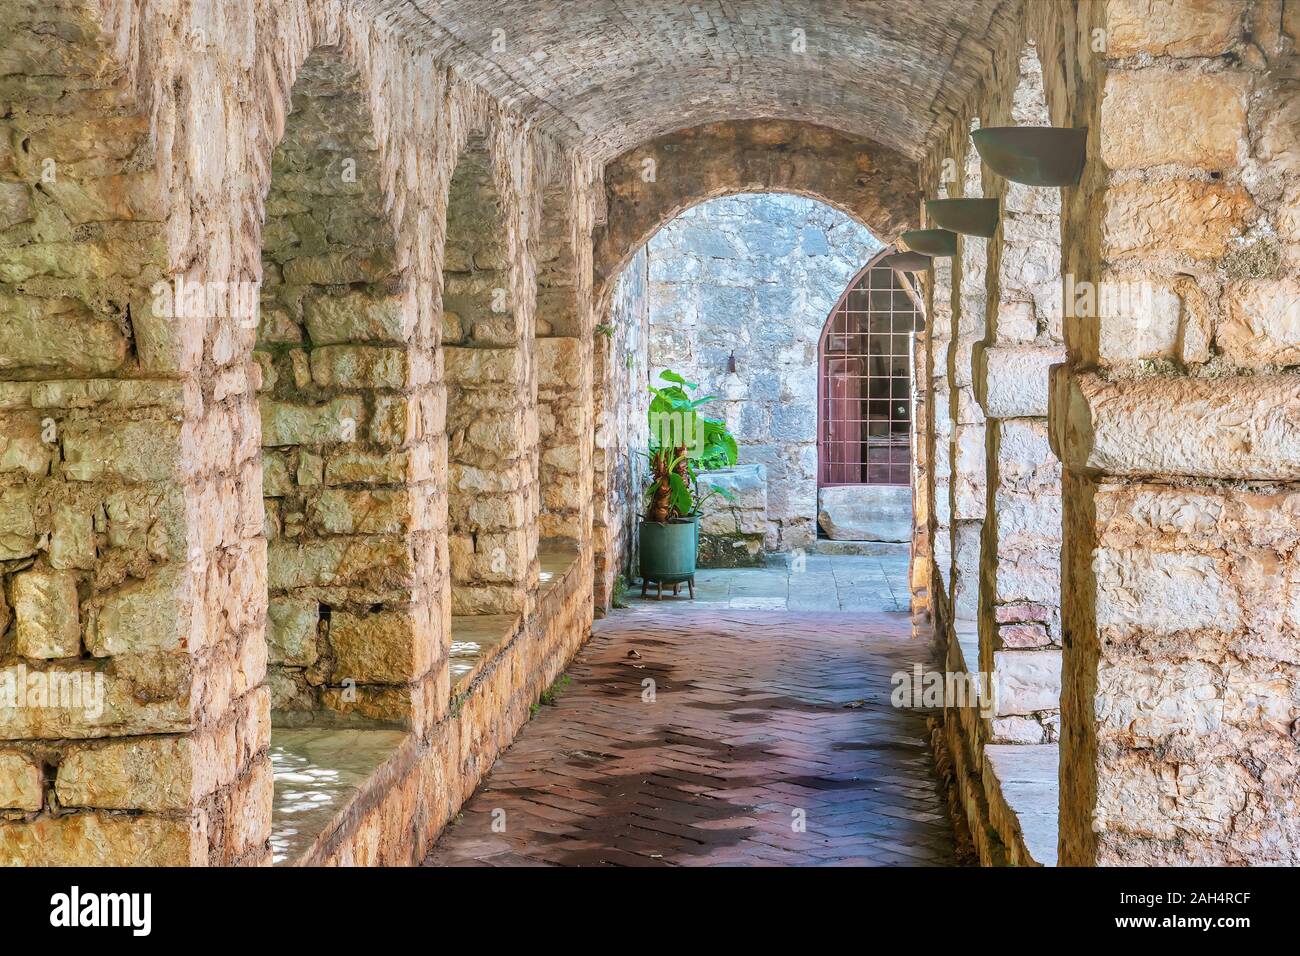 An arched passageway in a medieval building in Croatia, with a potted green plant adding color to the scene. Stock Photo